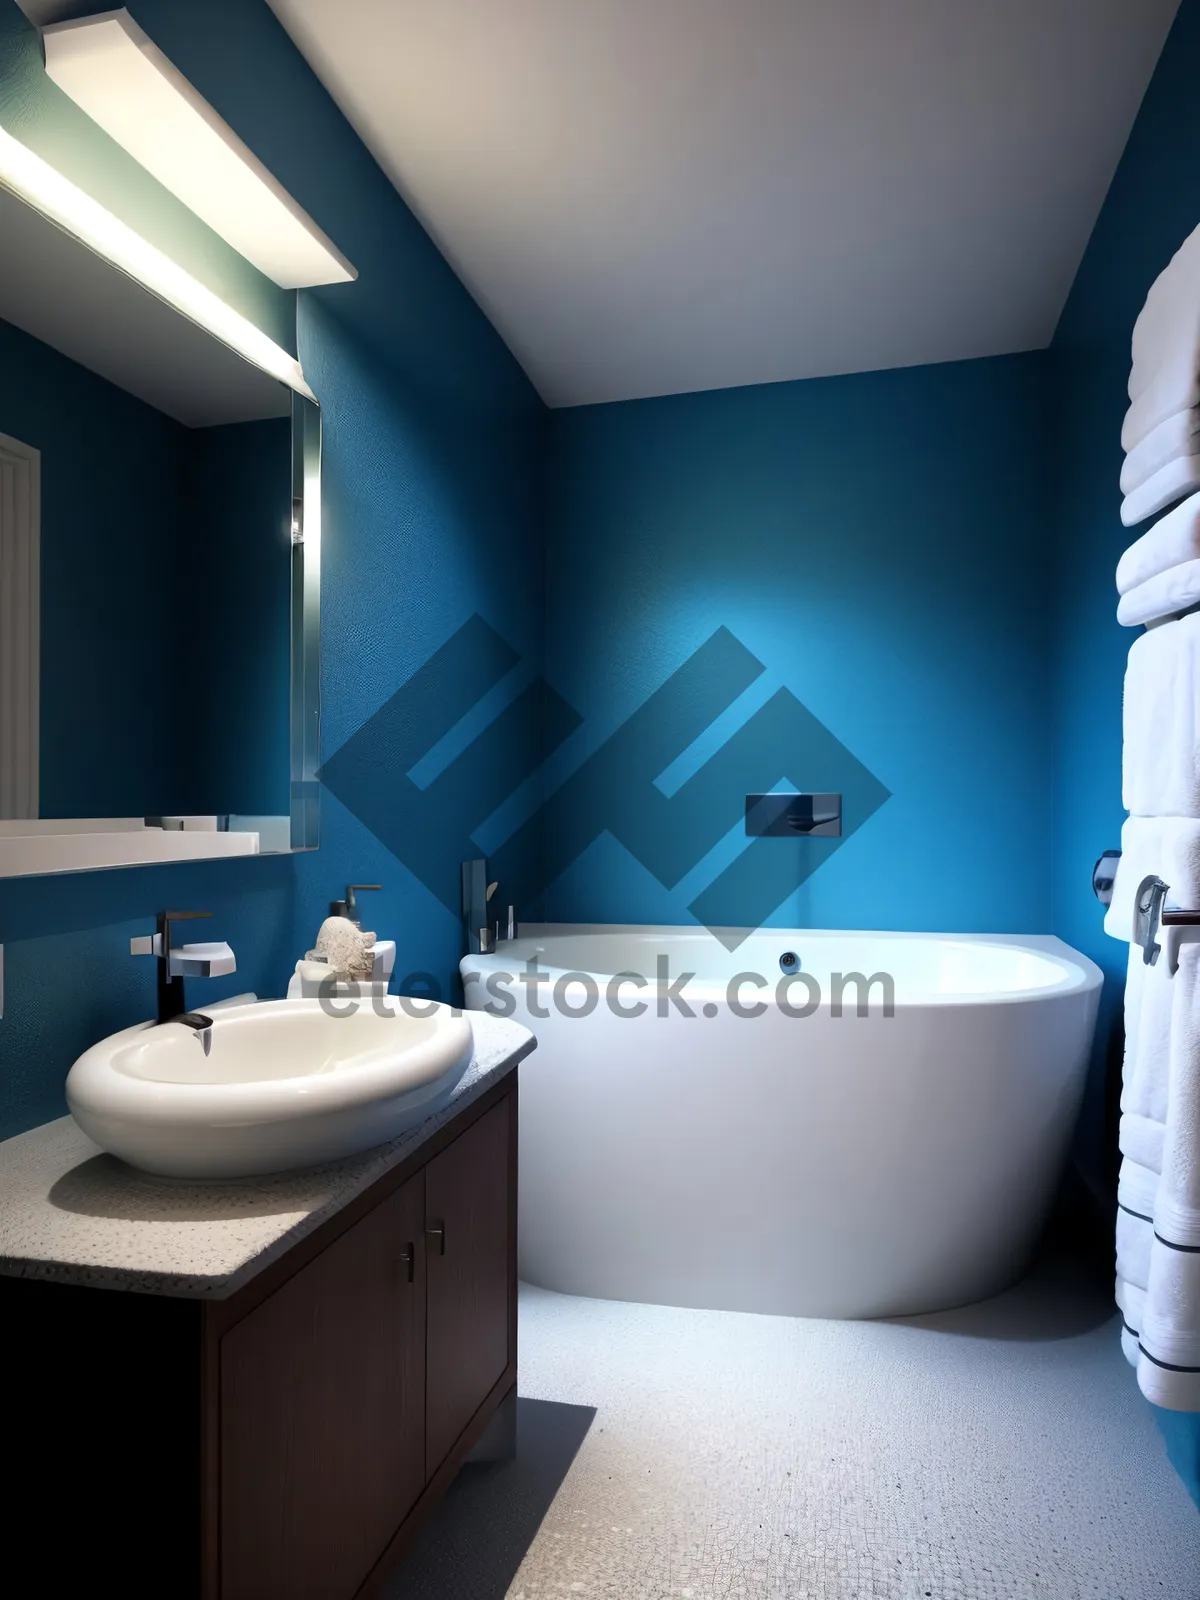 Picture of Modern Luxury Bathroom With Clean and Stylish Fixtures